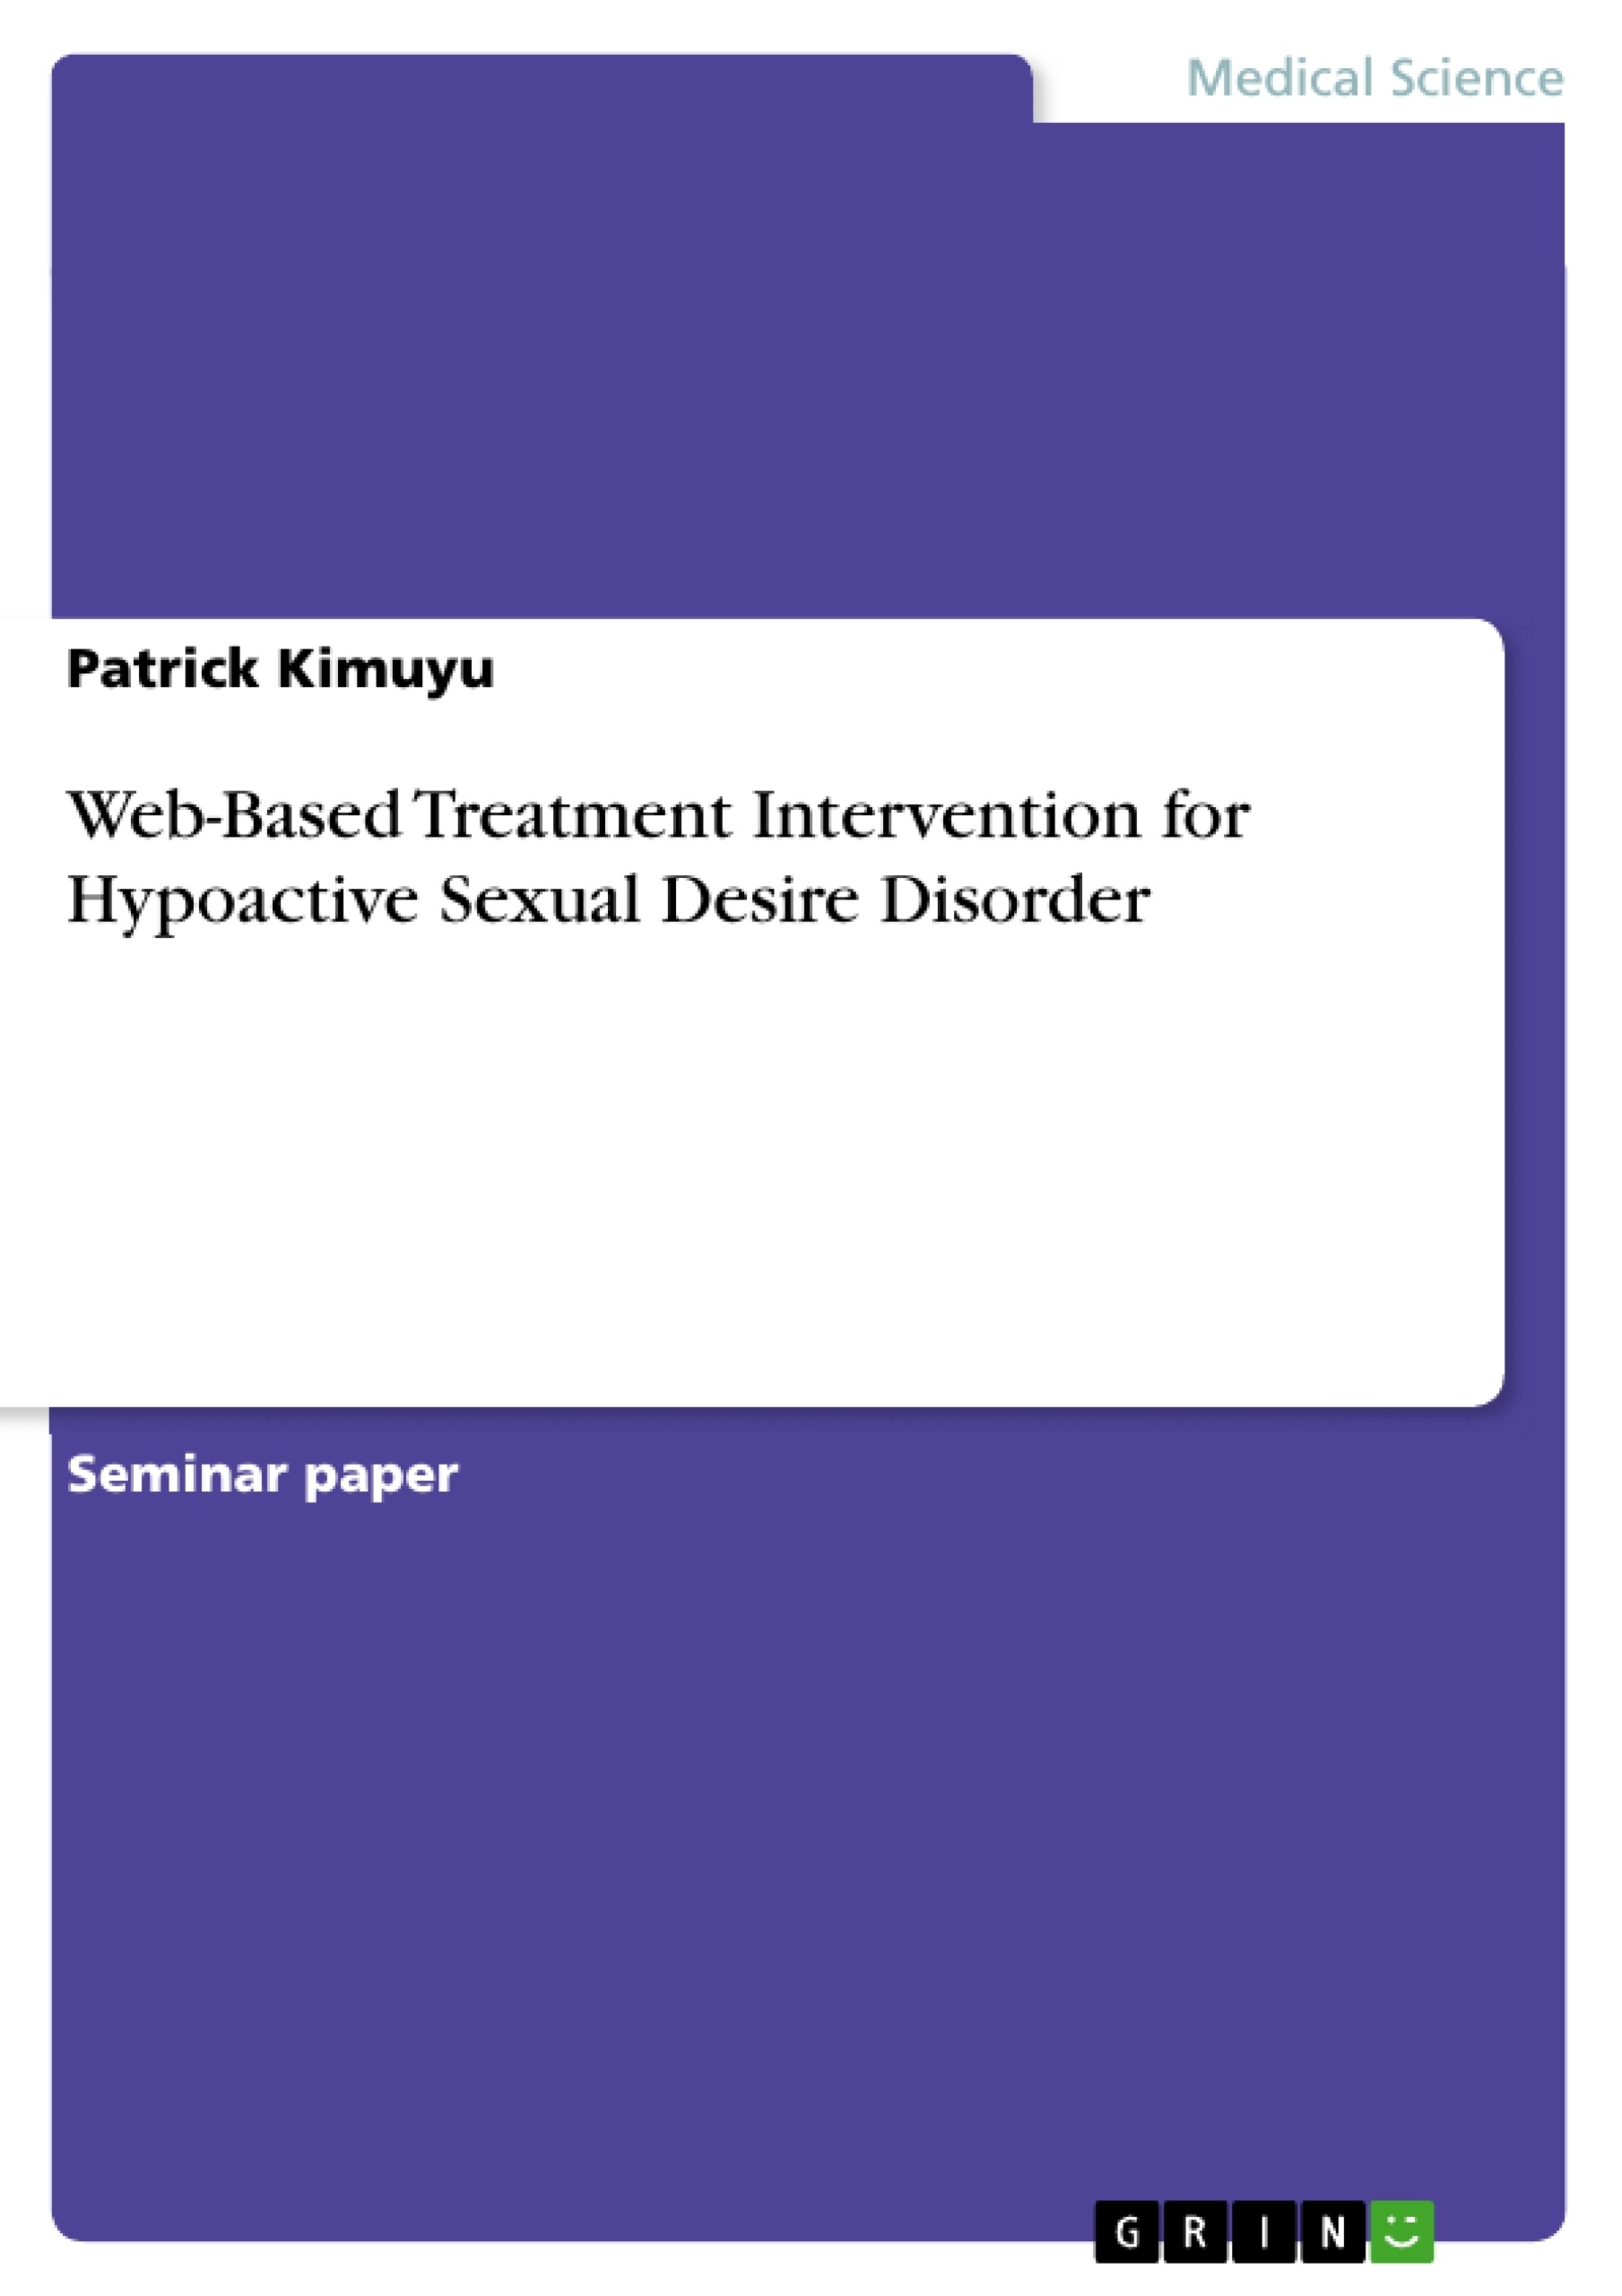 Titre: Web-Based Treatment Intervention for Hypoactive Sexual Desire Disorder